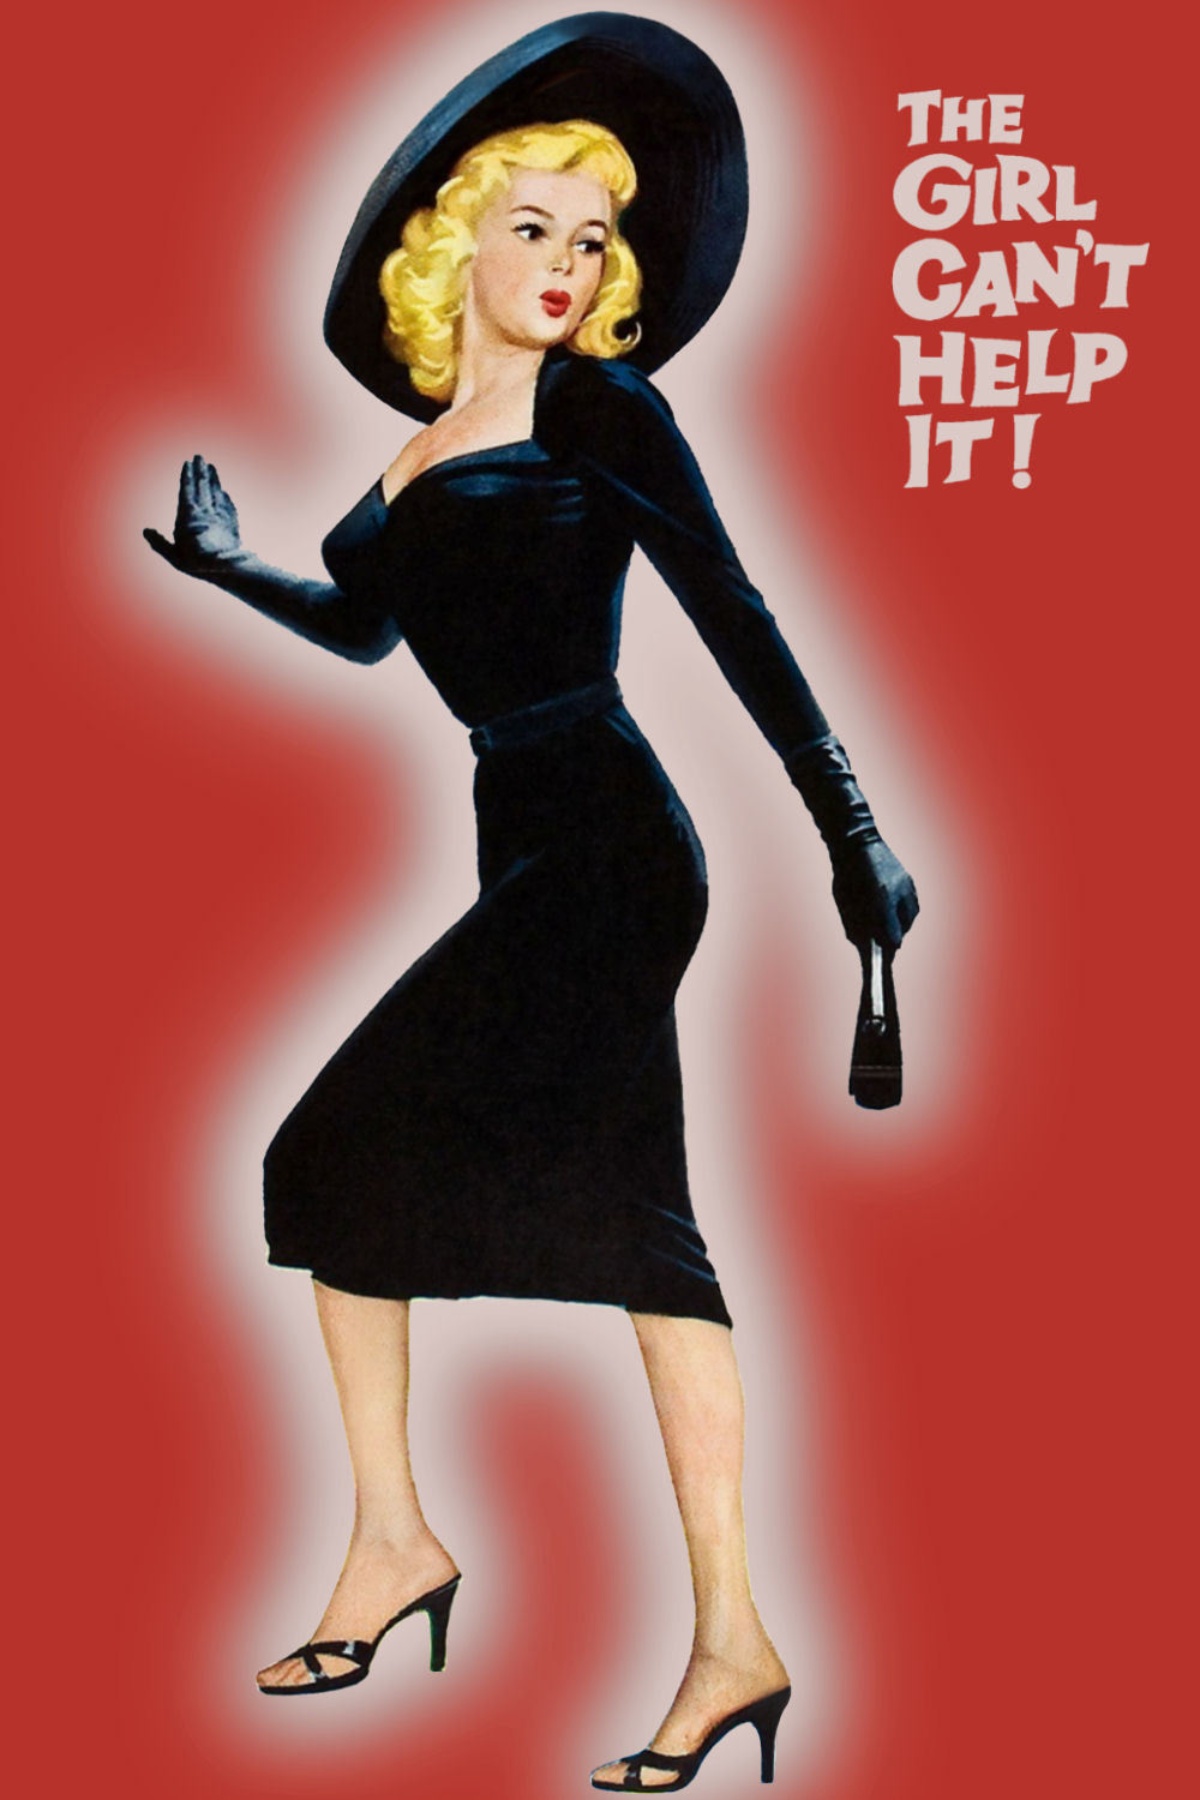 We can t help it. The girl can't help it poster.